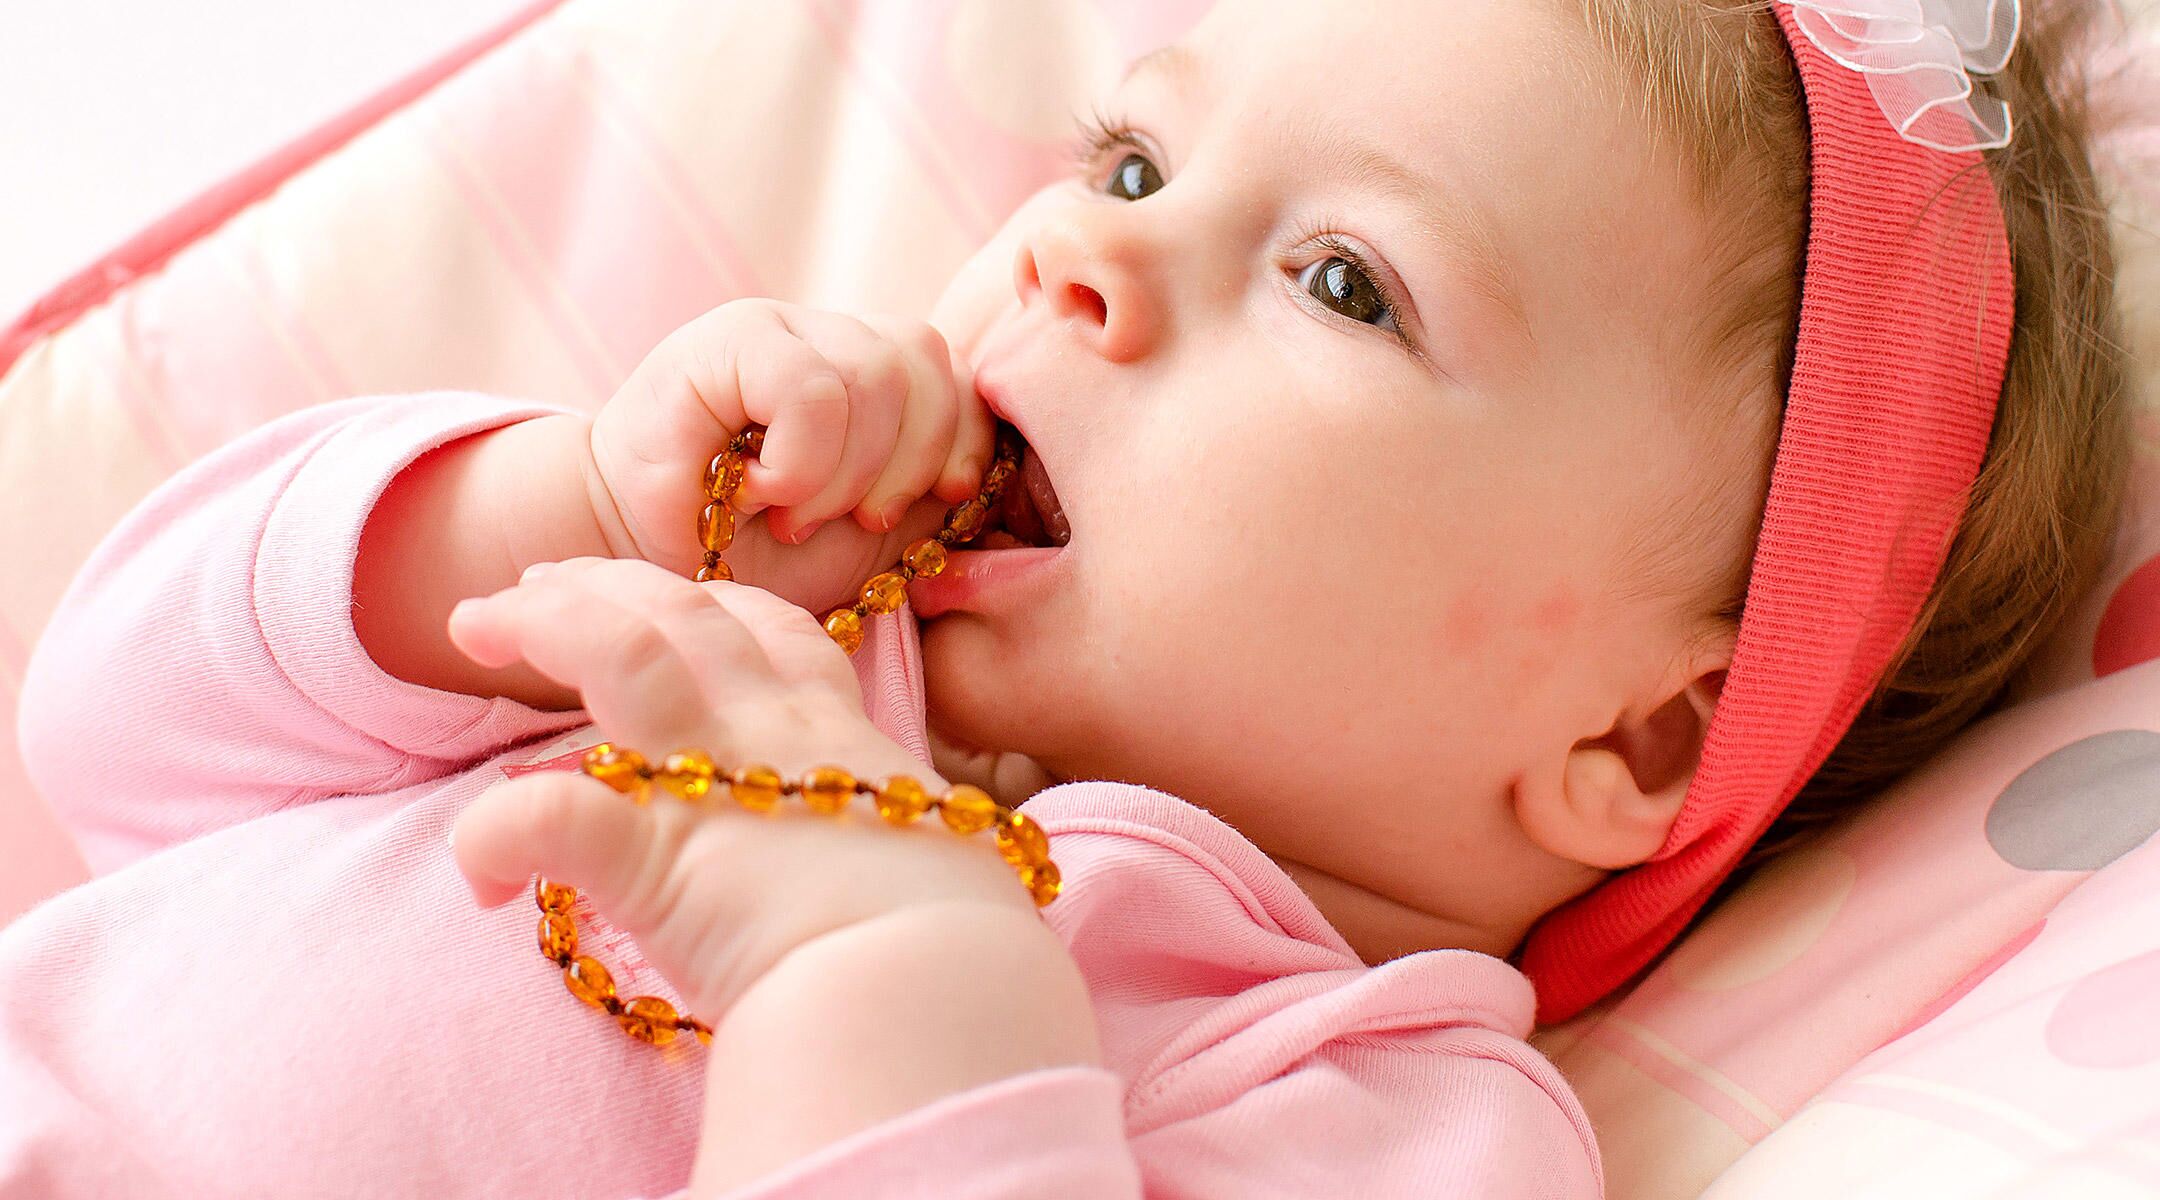 Amber Teething Necklace: Safety Concerns For Baby?